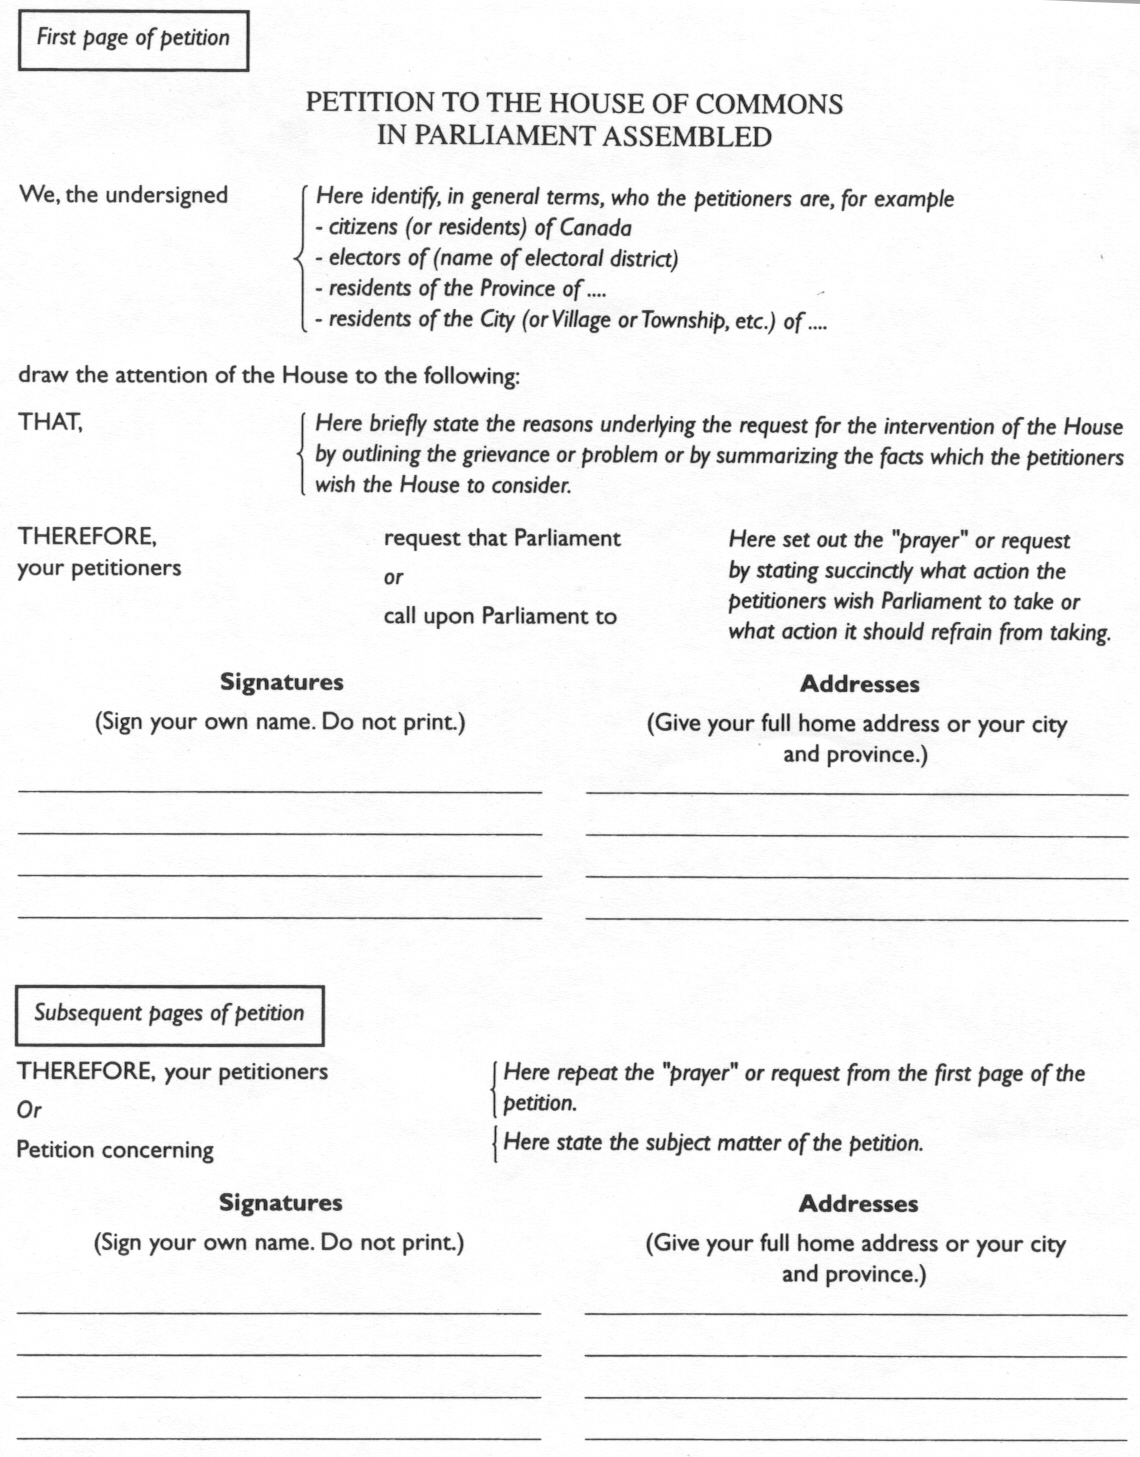 An image showing the format to be followed for the first and subsequent pages of a typical petition.